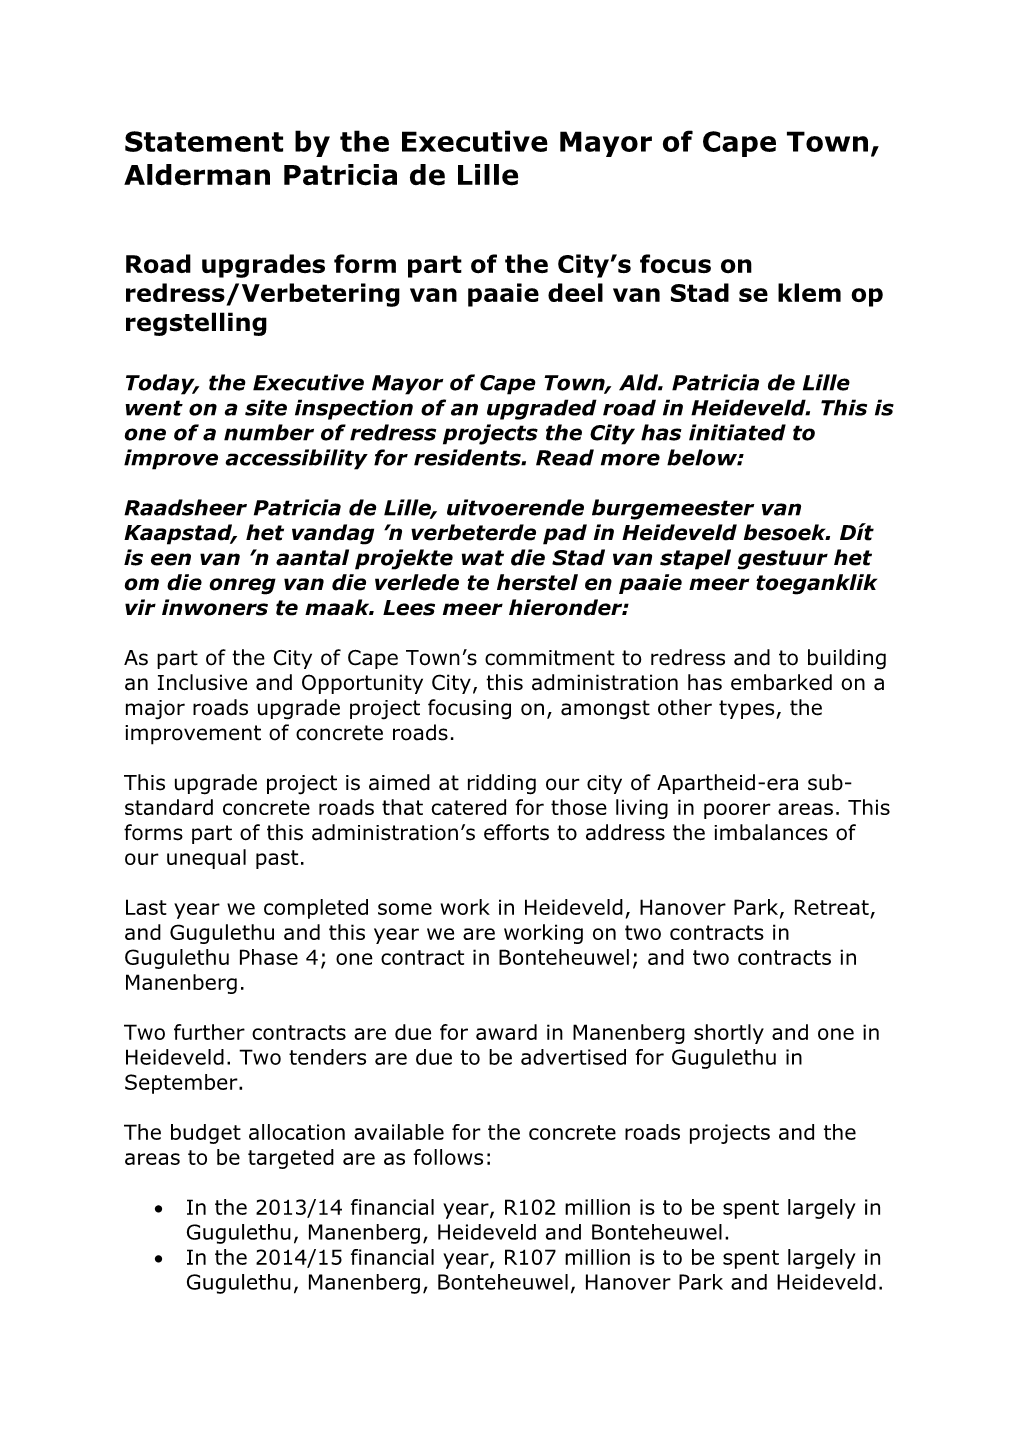 Statement by the Executive Mayor of Cape Town, Alderman Patricia De Lille